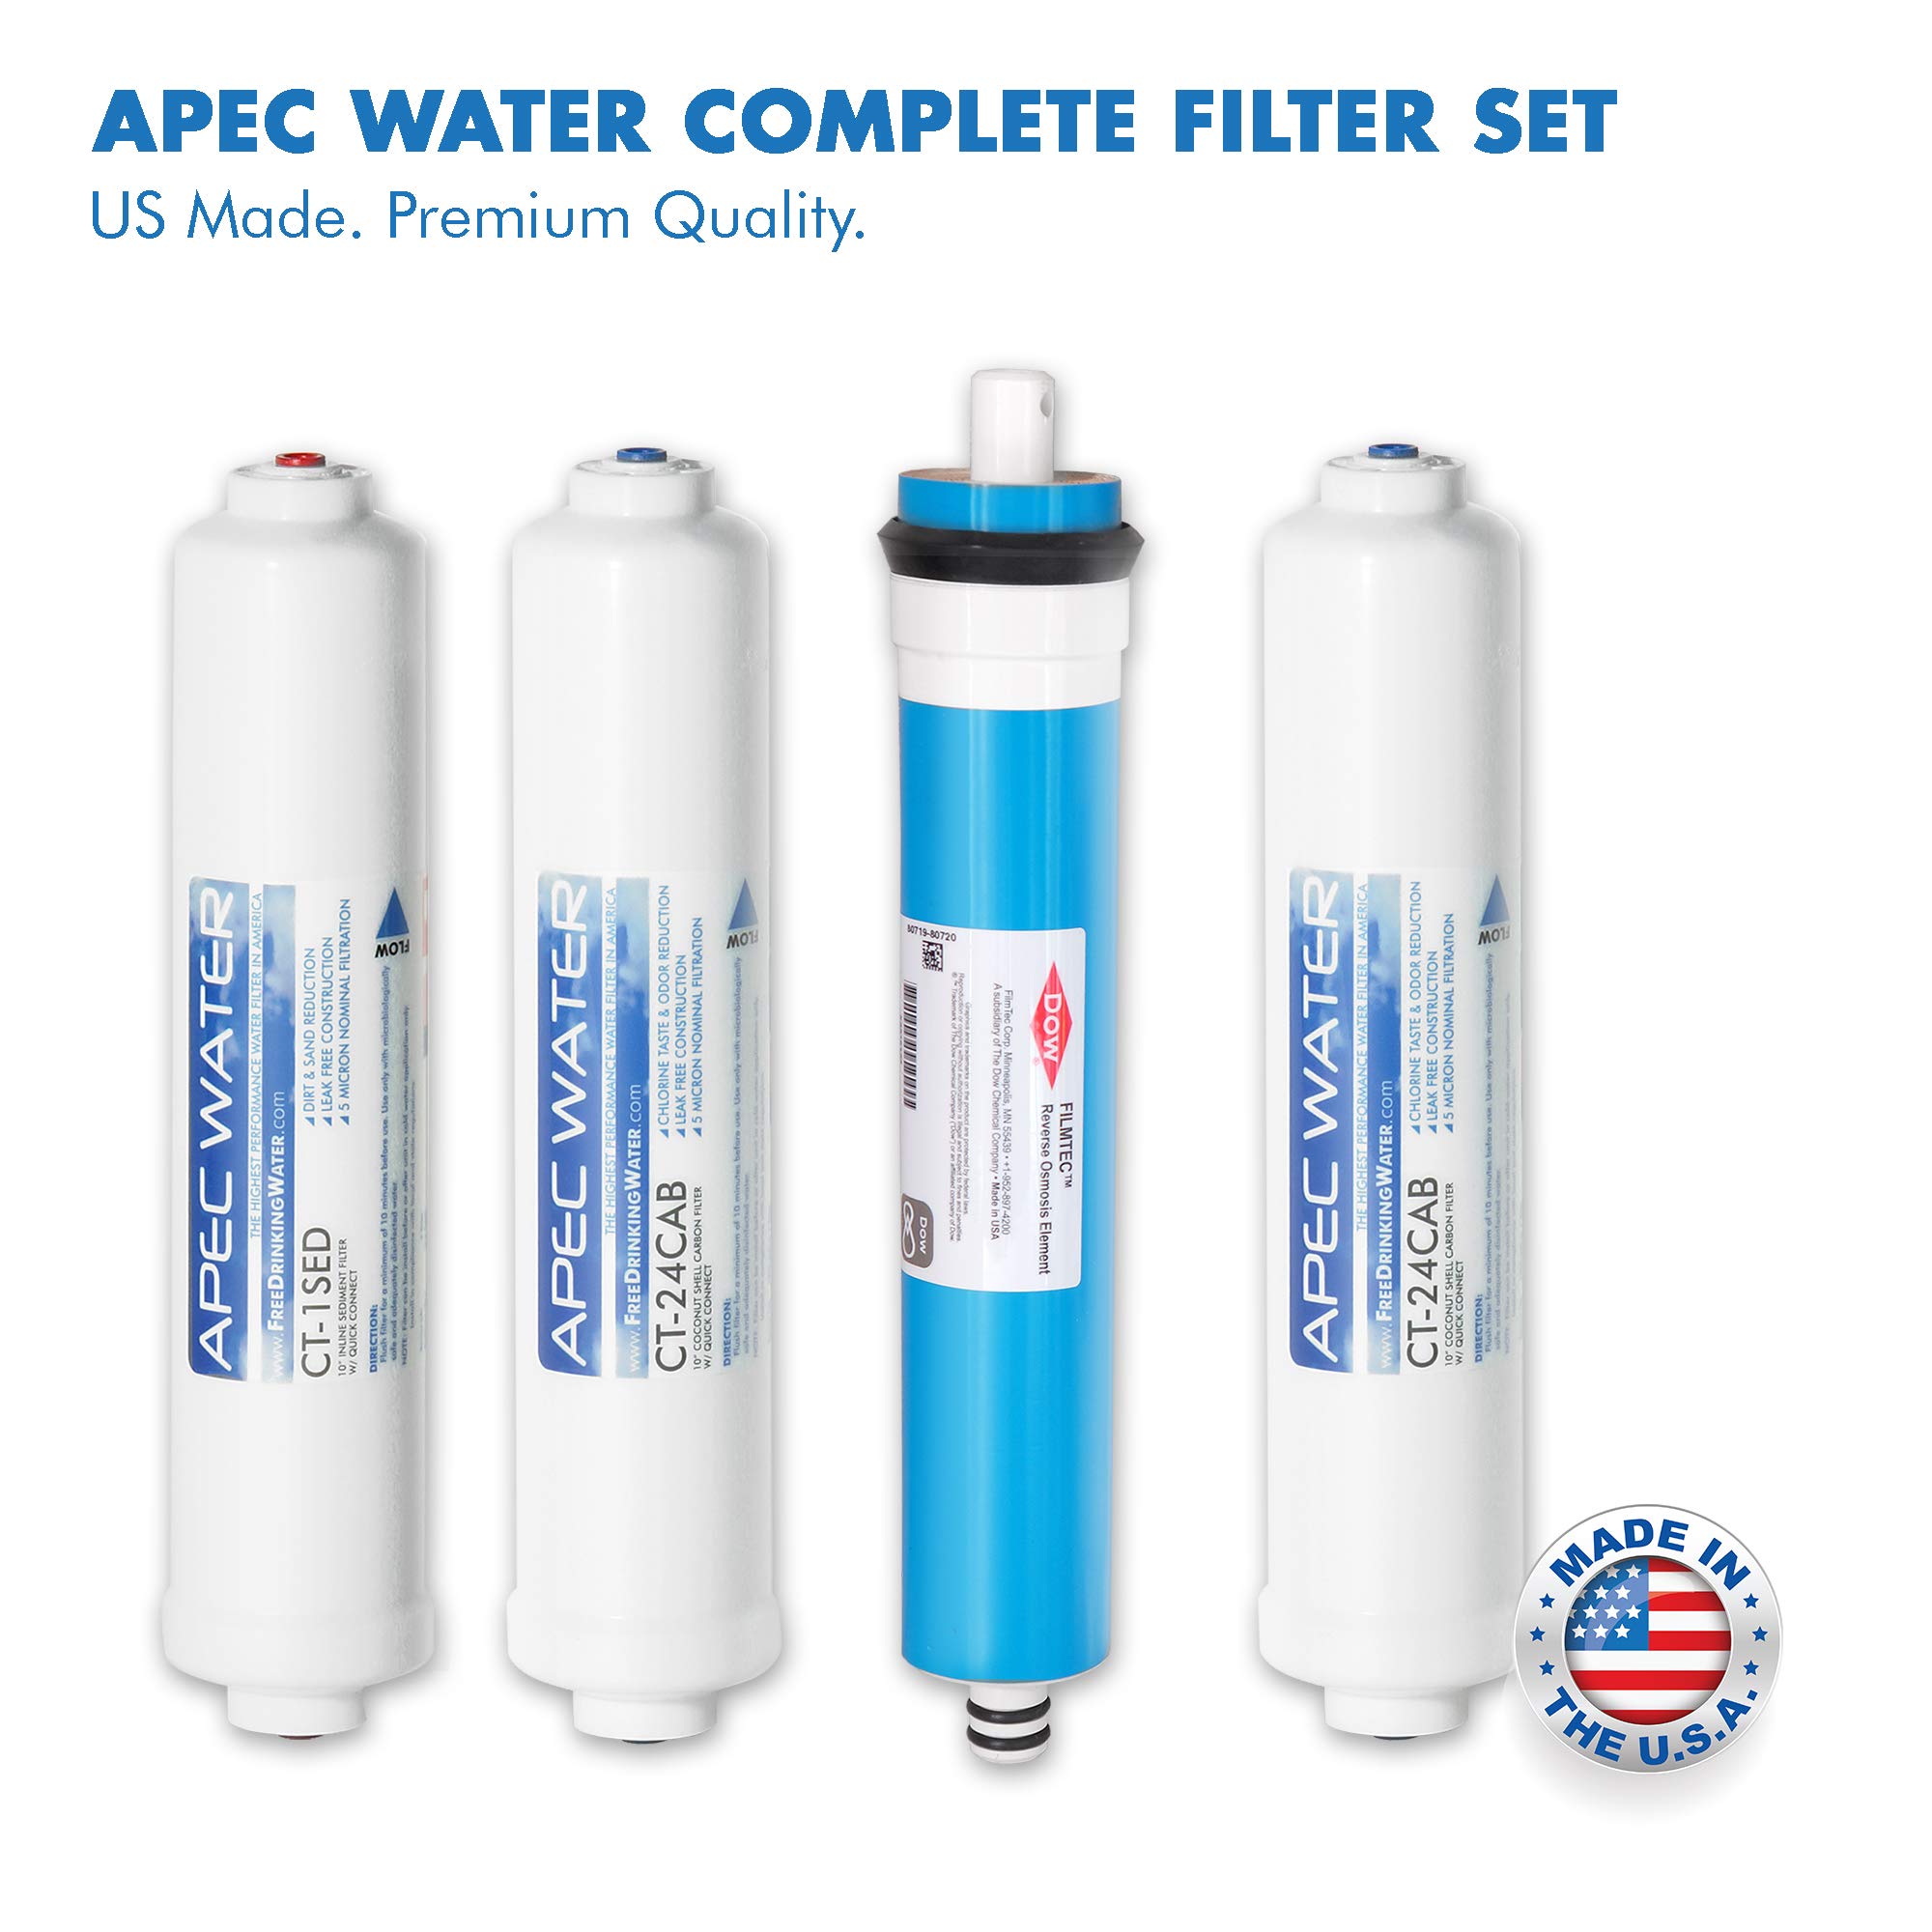 APEC Water Systems RO-CTOP-C Portable Countertop Reverse Osmosis Water Filter System with Case, Installation-Free, Fits Most Standard Faucet